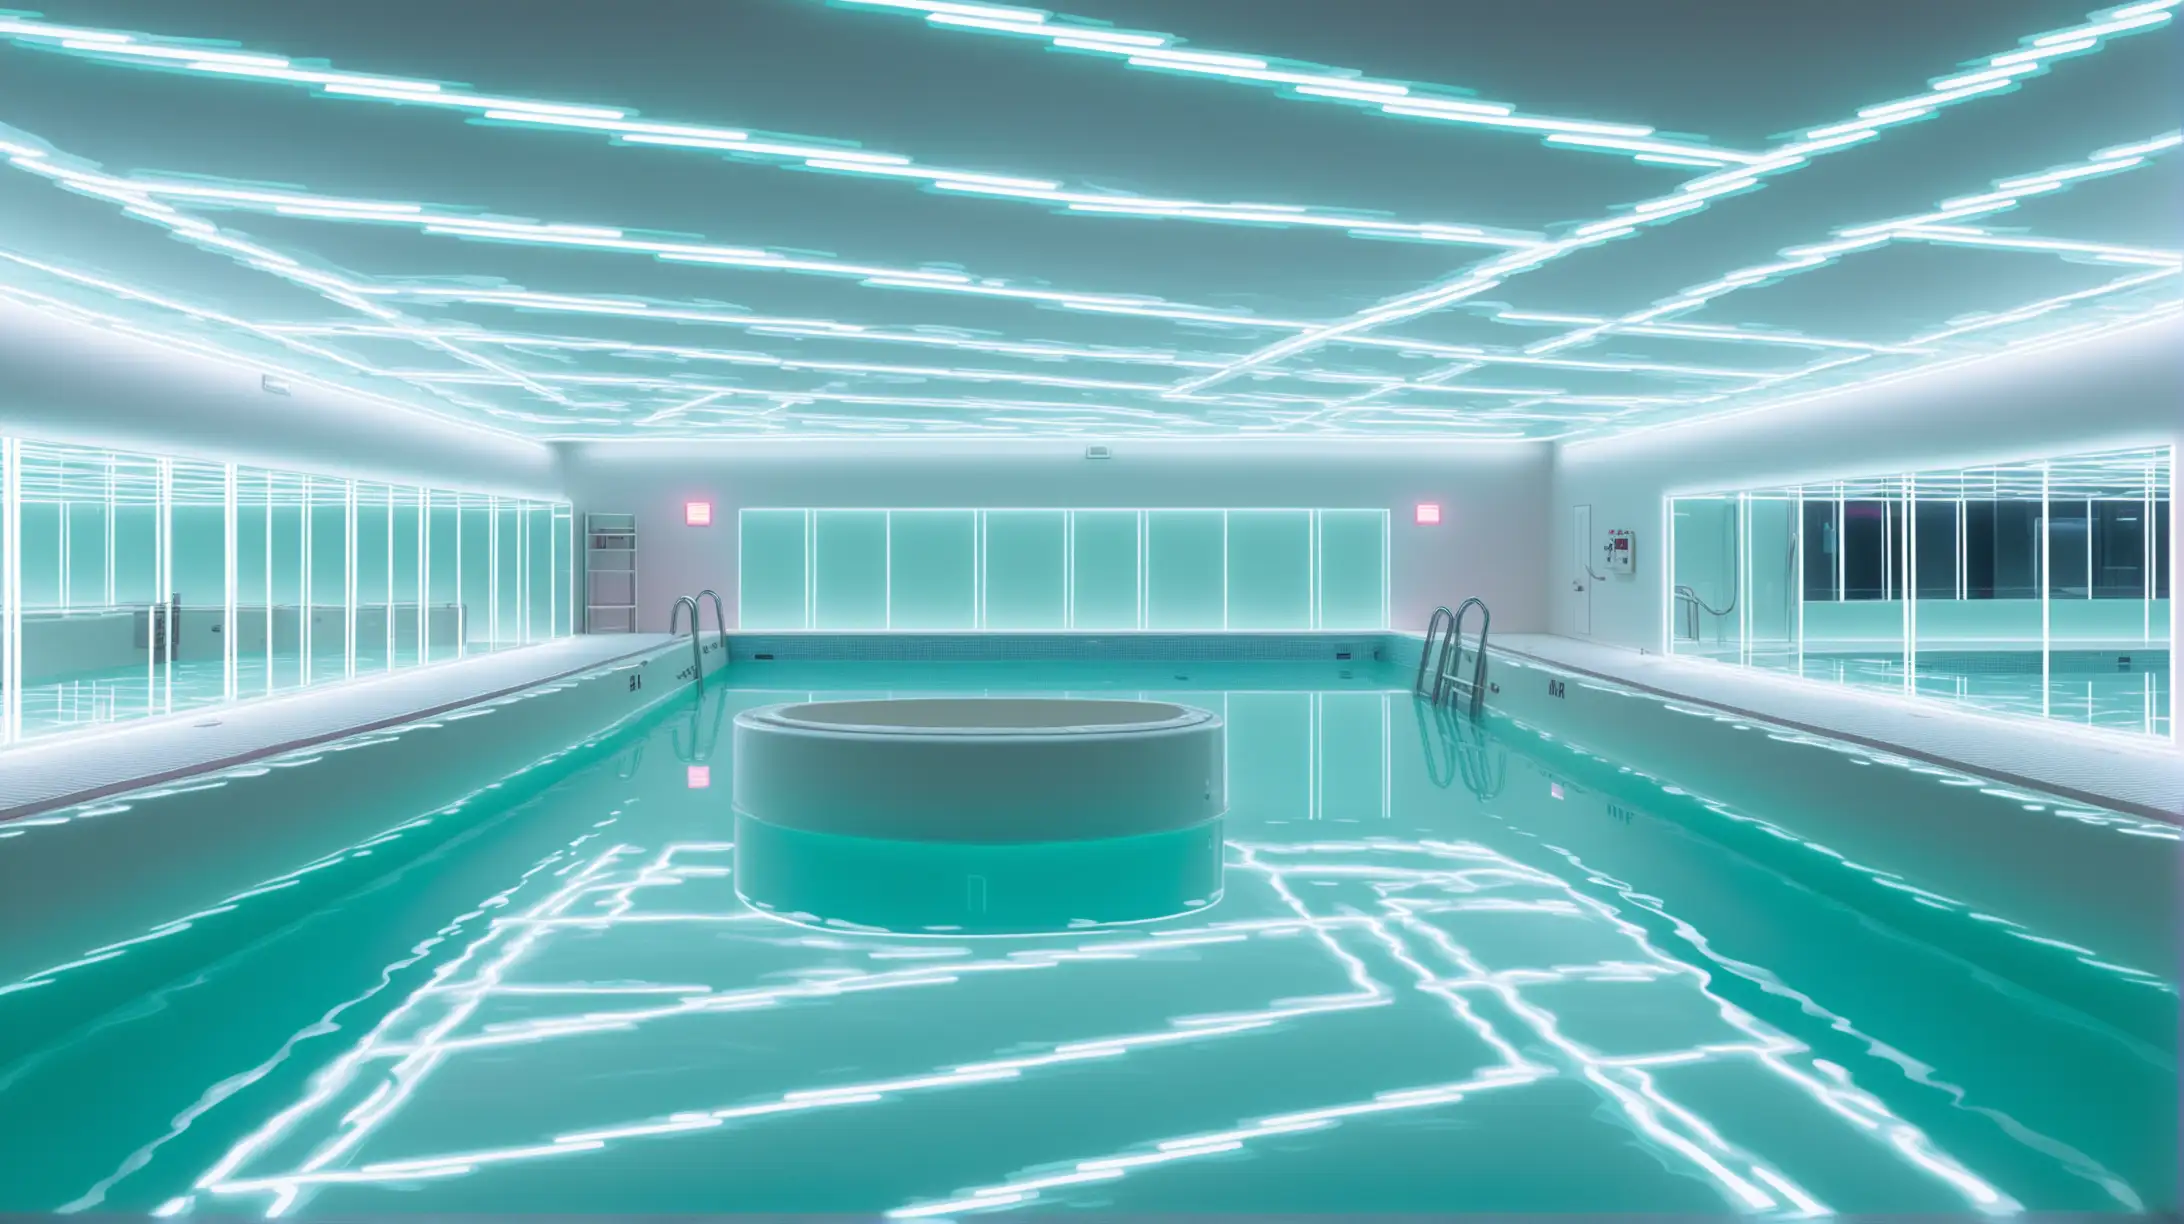 indoor basement pool full of milk creamer. no water. very intricately and microscopically detailed. highlighting the white color. emphasizing the free flow of liquid. emphasizing the smooth and creaminess of the milk. the ceiling is reflected by a mirror. the room is dim with neon lights. The color scheme revolves around white. The key accessory is the milk 